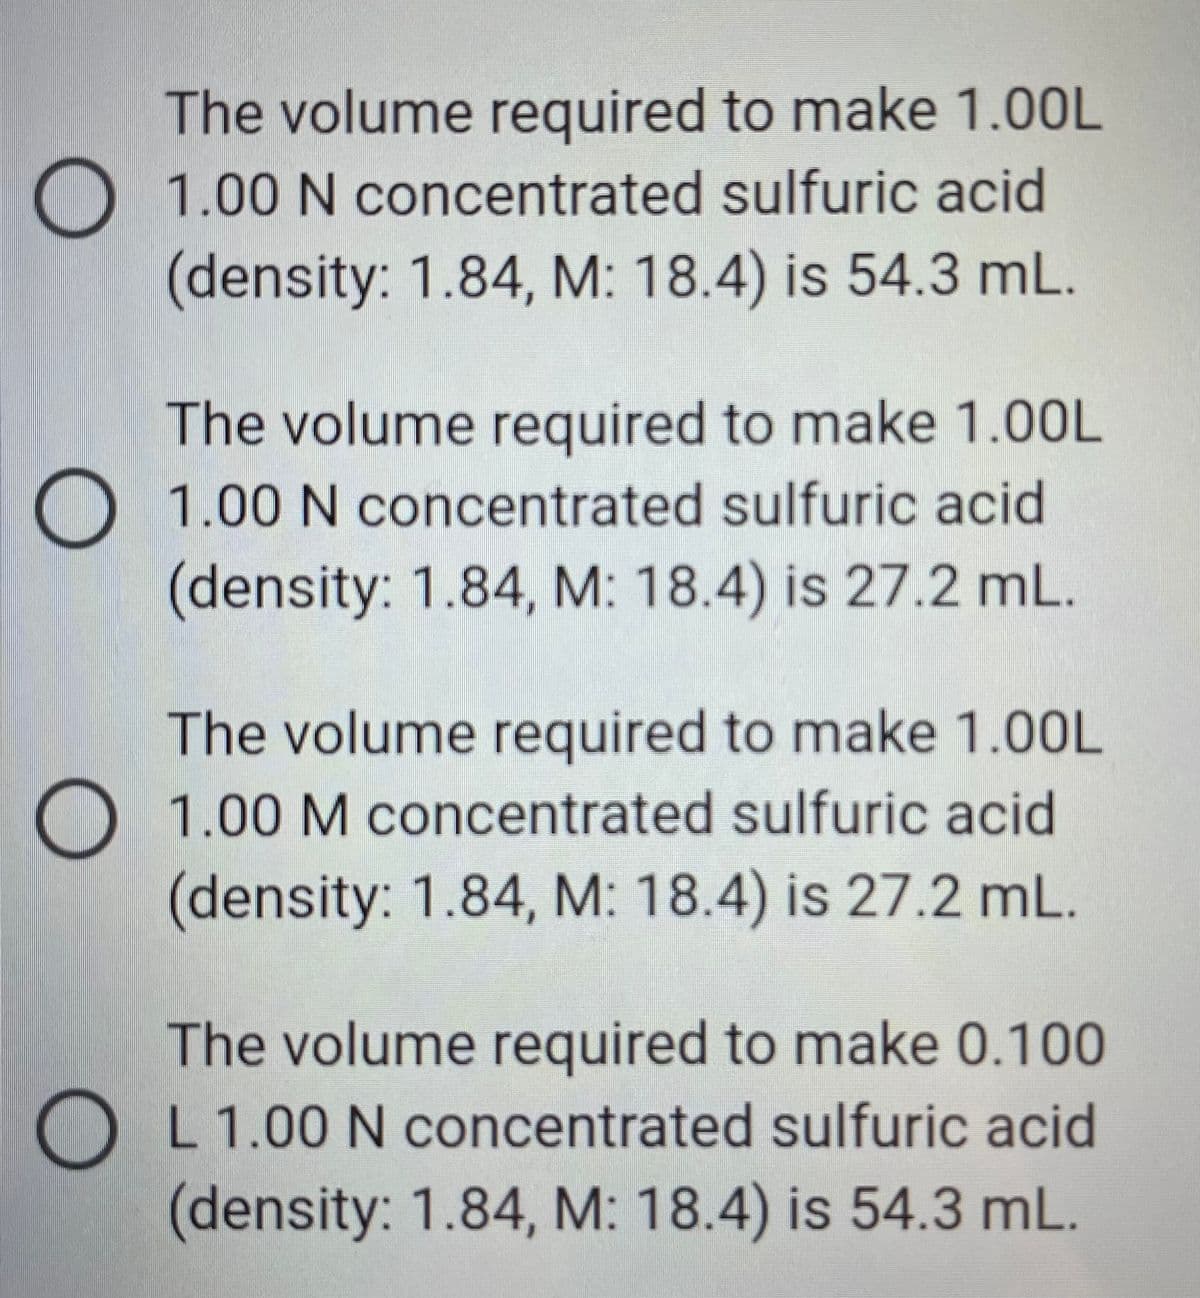 The volume required to make 1.00L
O 1.00 N concentrated sulfuric acid
(density: 1.84, M: 18.4) is 54.3 mL.
The volume required to make 1.00L
O 1.00 N concentrated sulfuric acid
(density: 1.84, M: 18.4) is 27.2 mL.
The volume required to make 1.00L
O 1.00 M concentrated sulfuric acid
(density: 1.84, M: 18.4) is 27.2 mL.
The volume required to make 0.100
OL 1.00 N concentrated sulfuric acid
(density: 1.84, M: 18.4) is 54.3 mL.